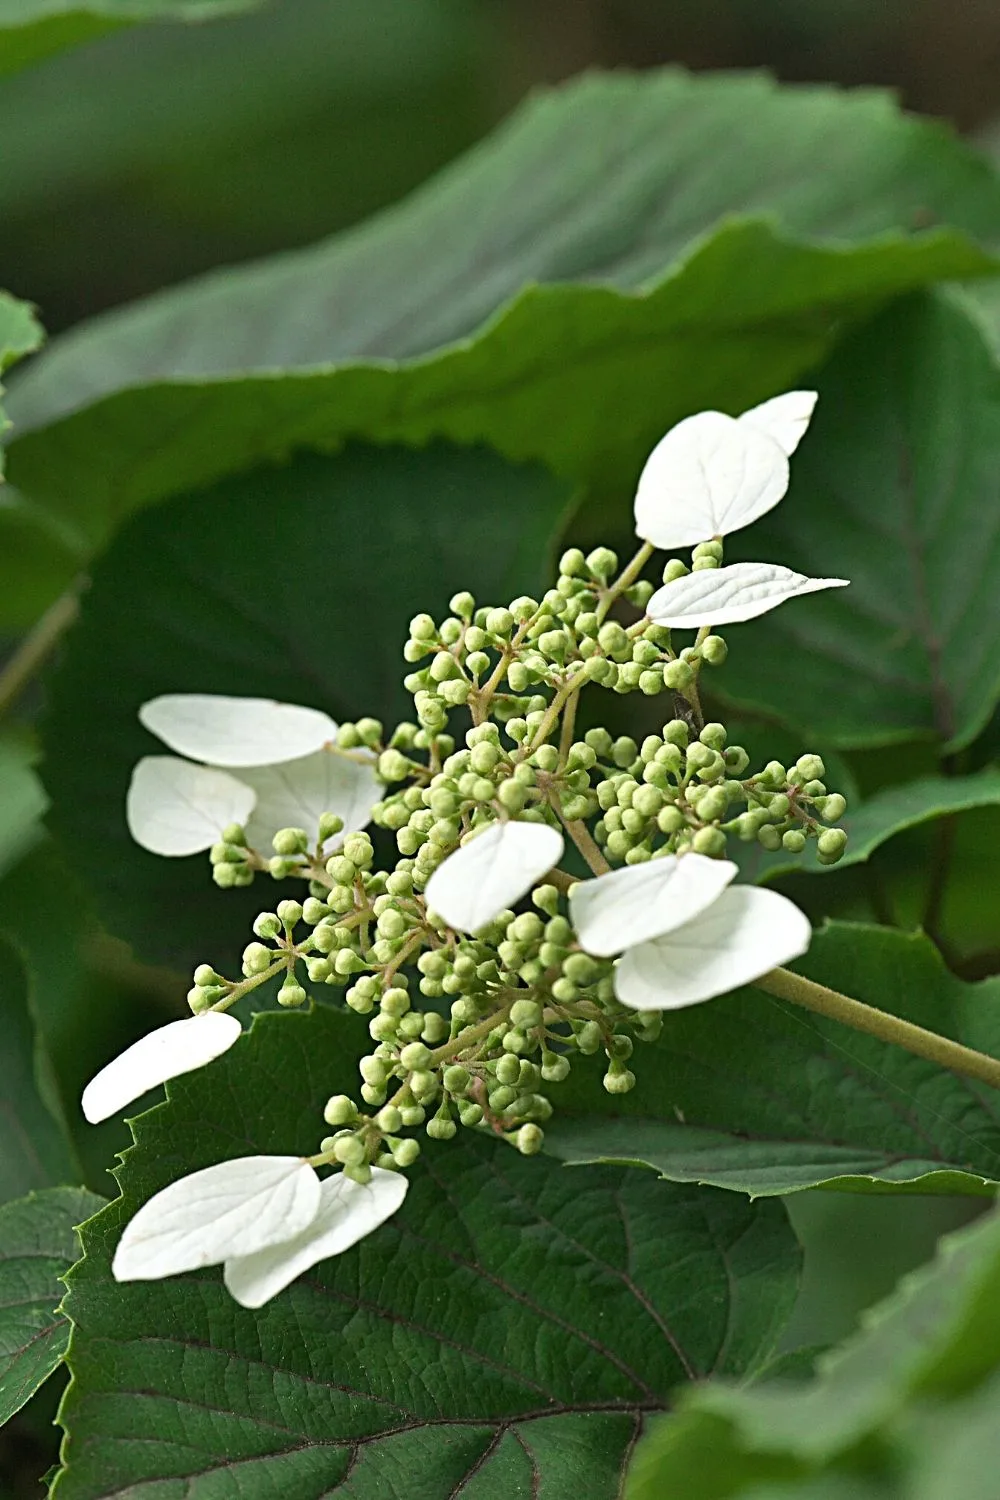 Climbing Hydrangea, though it prefers sunny locations, can thrive in shady north-facing balconies